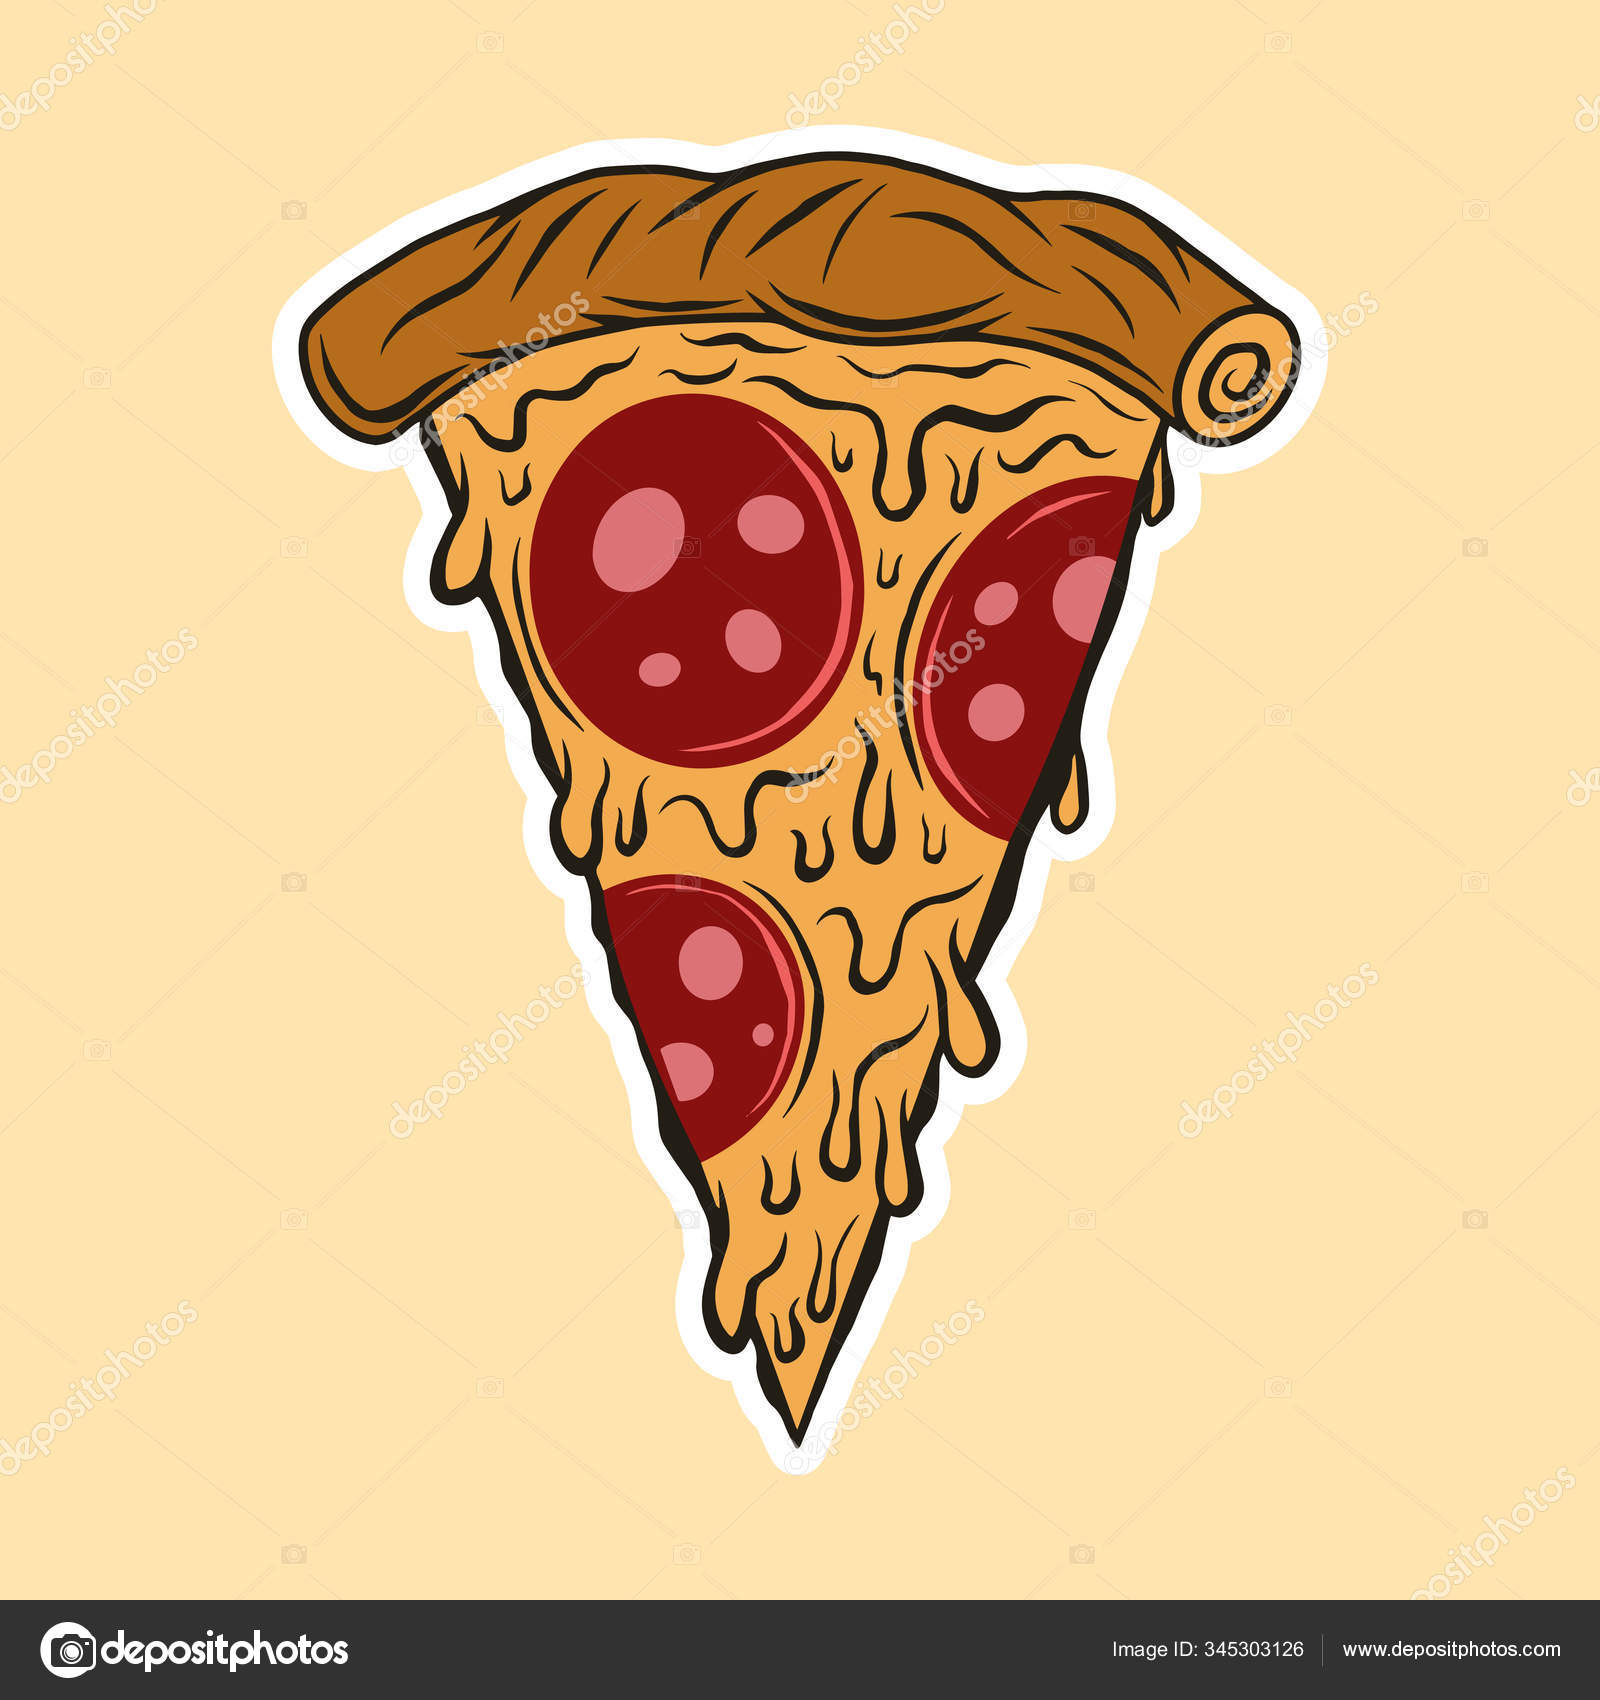 Hand Drawn Pizza Vector Hd Images, Slice Of Pizza Vector